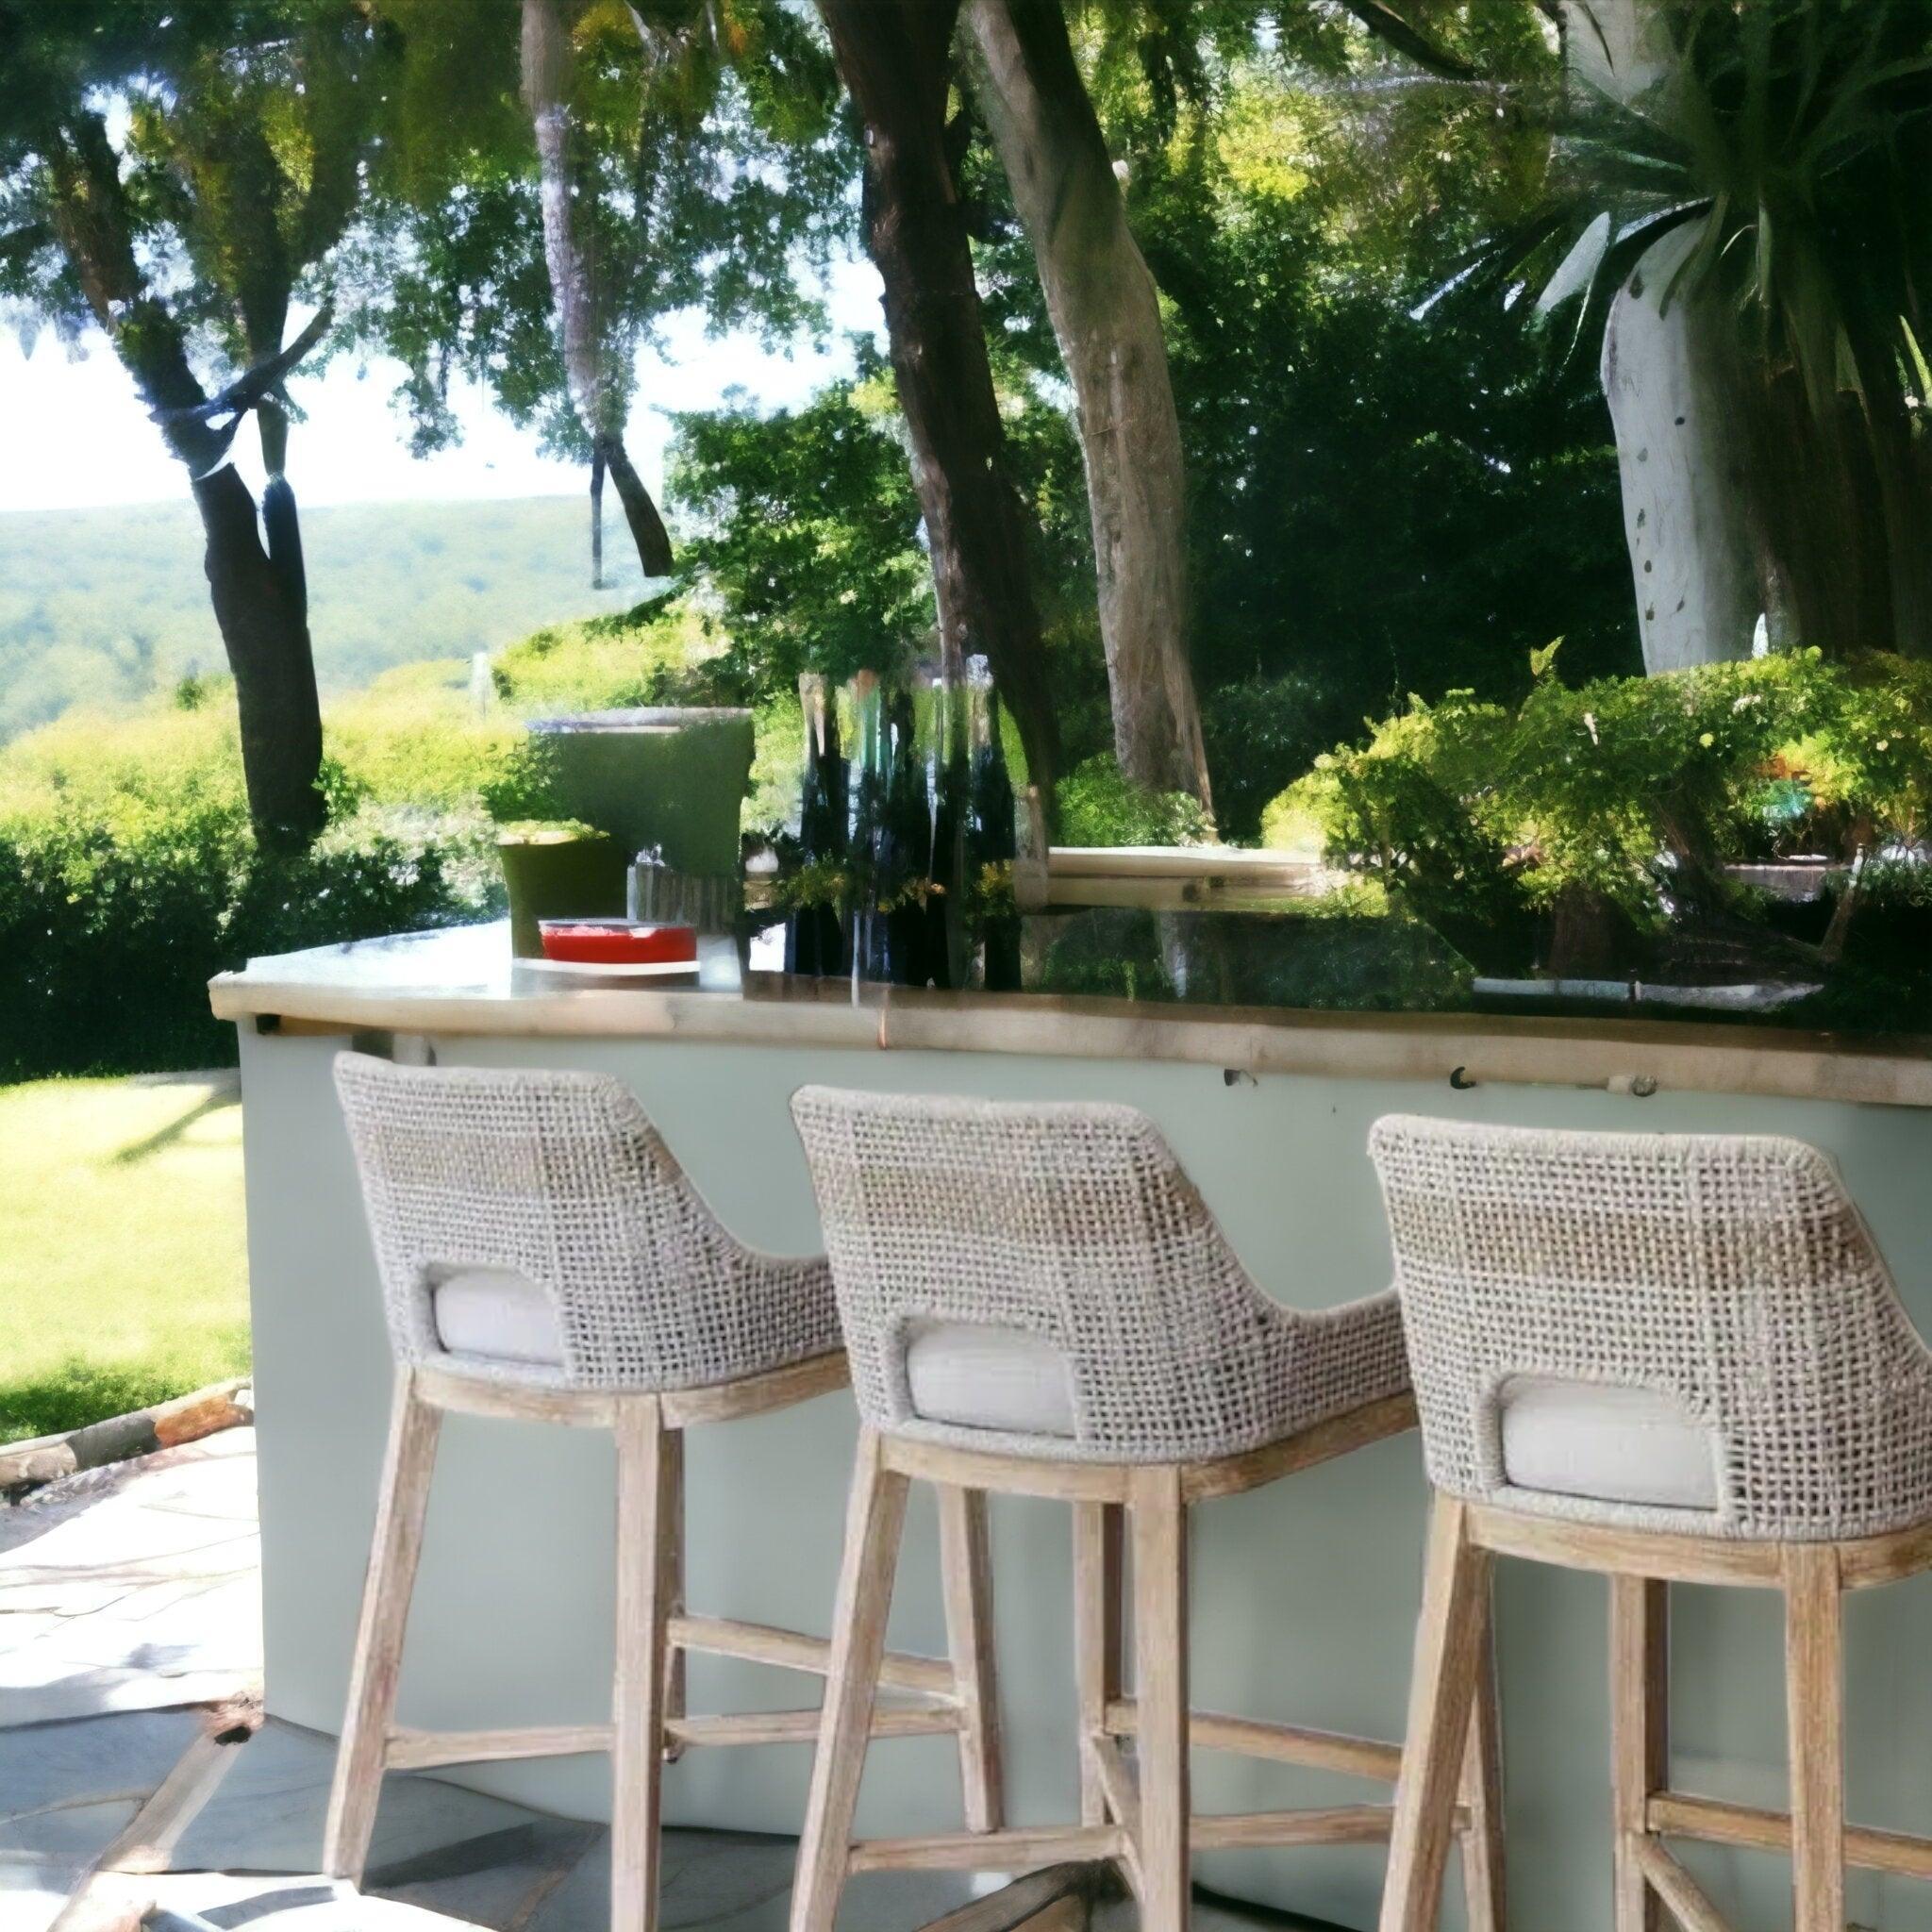 LOOMLAN Outdoor - Tapestry Outdoor Barstool Taupe & White Rope and Teak - Outdoor Bar Stools